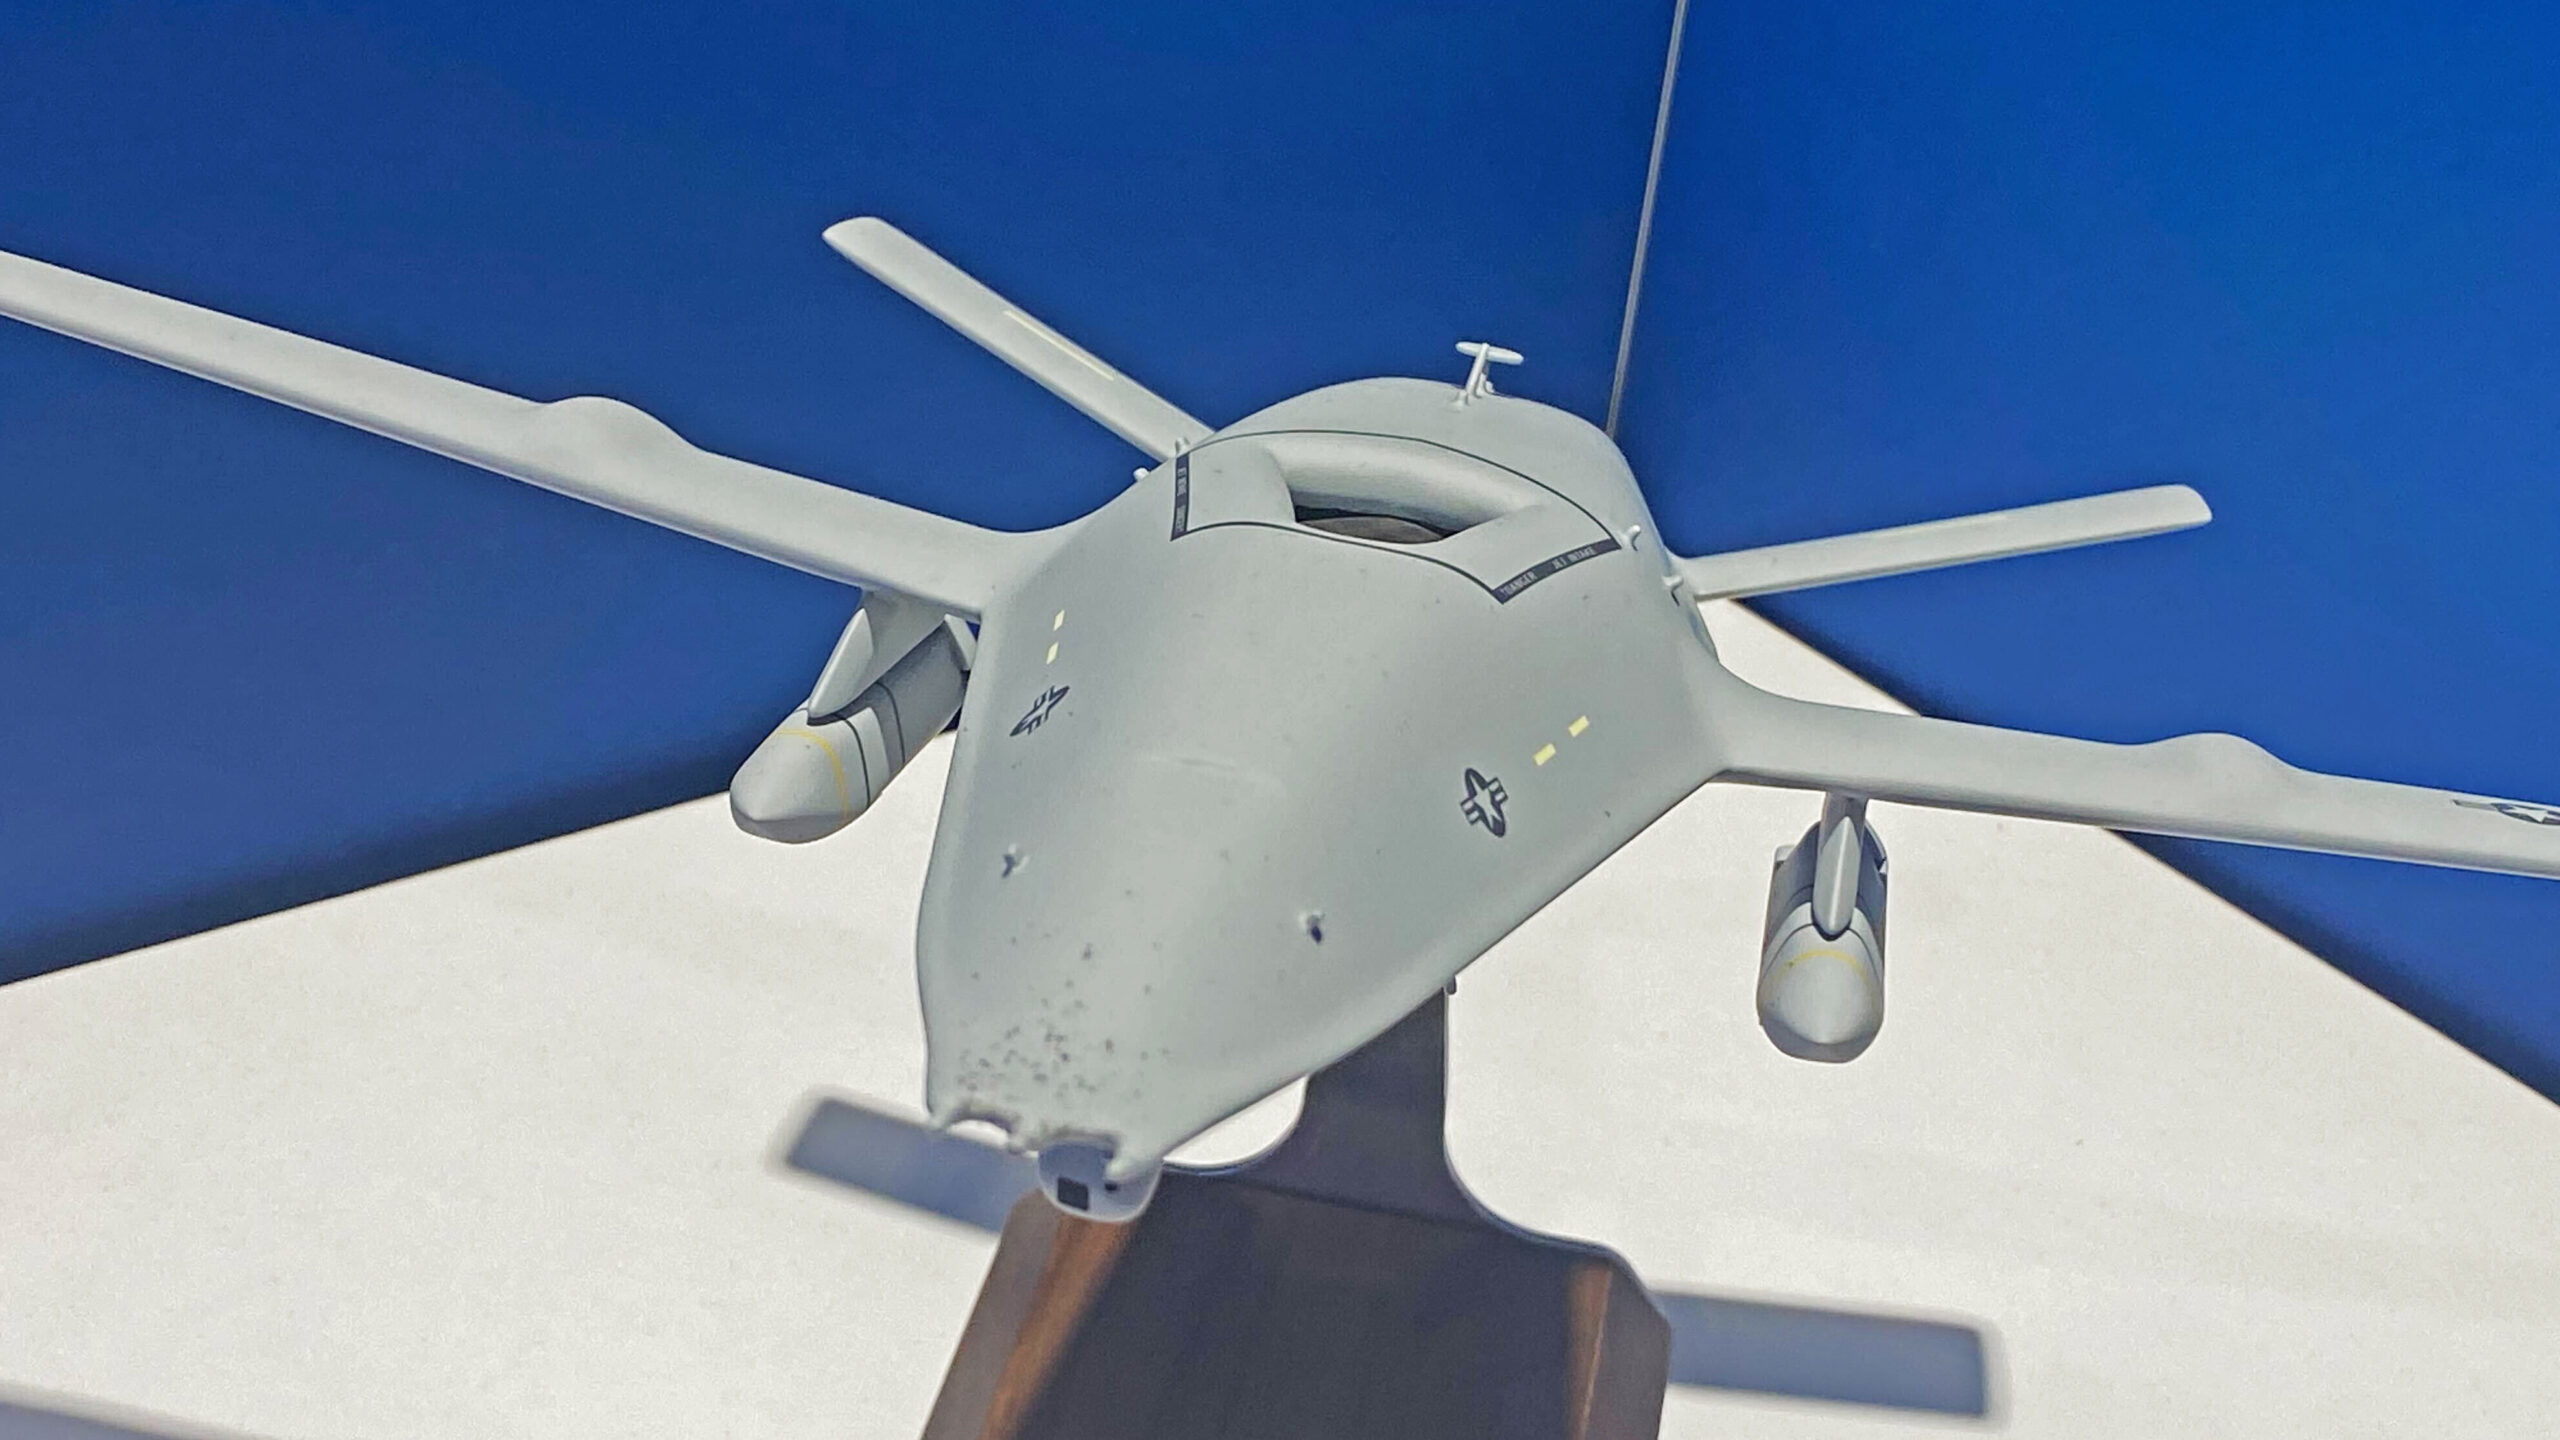 Boeing has displayed a model of its MQ-25 Stingray carrier-based tanker drone armed with a pair of stealthy Lockheed Martin AGM-158C Long-Range Anti-Surface Missiles (LRASM).